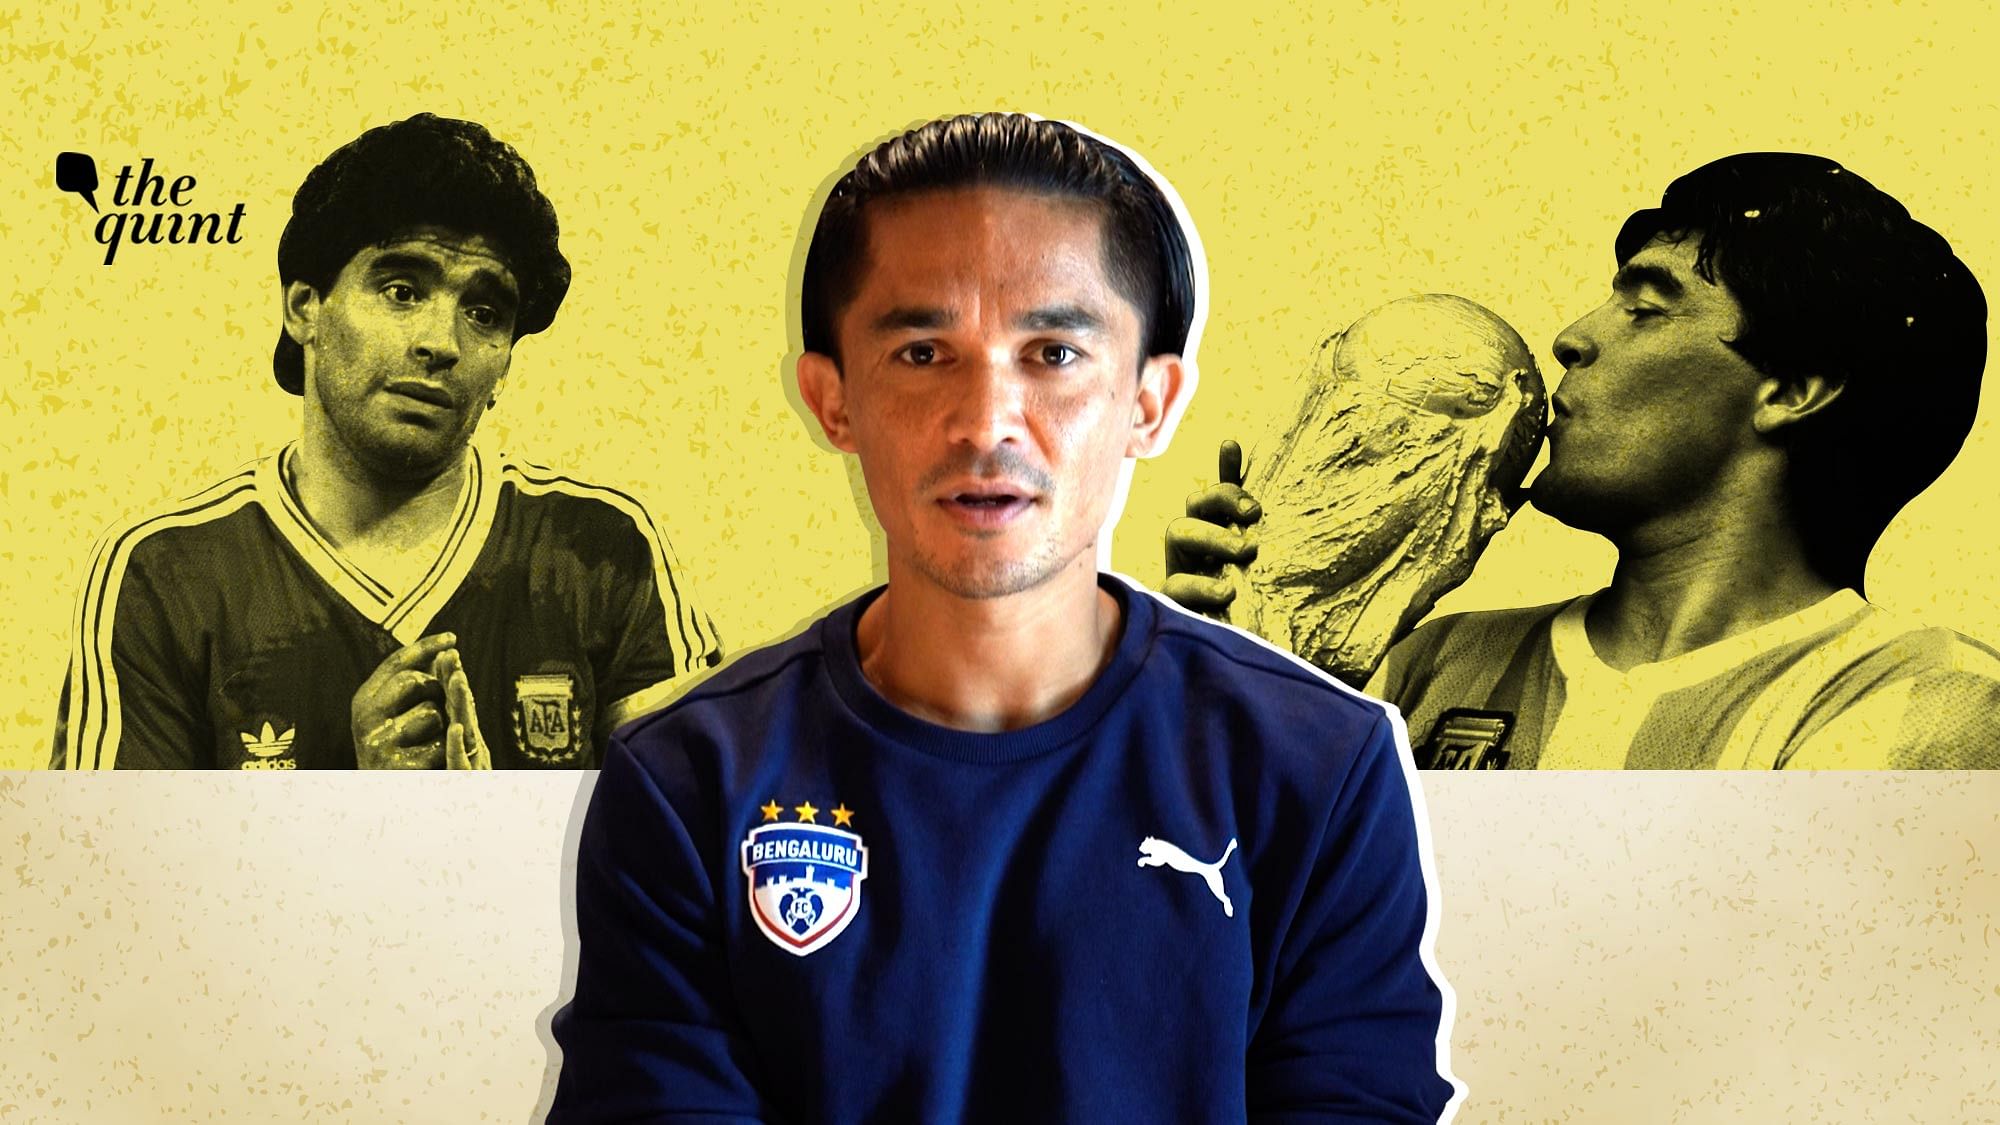 Watch Video: Indian football captain pays tribute to Diego Maradona.